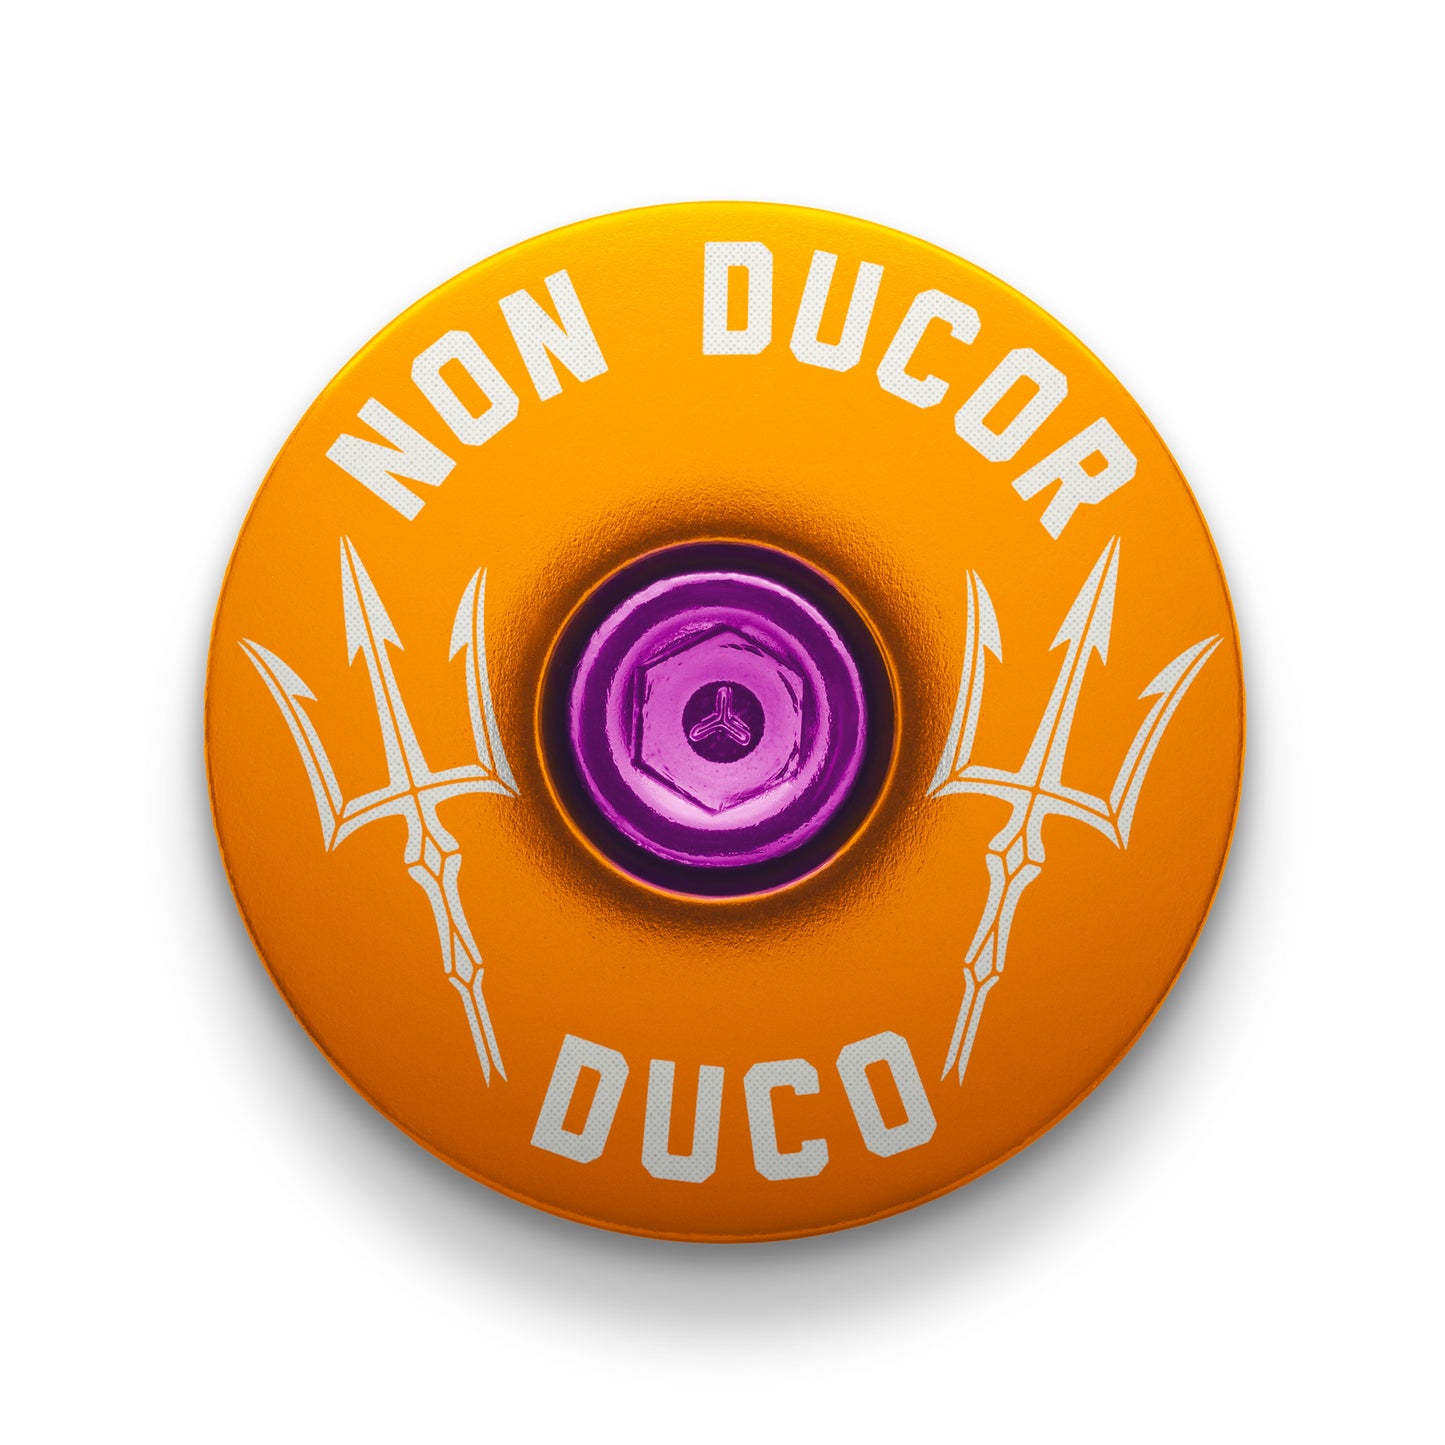 Non Ducor, Duco Custom Bicycle Headset Cap – Dispatch Custom Cycling  Components